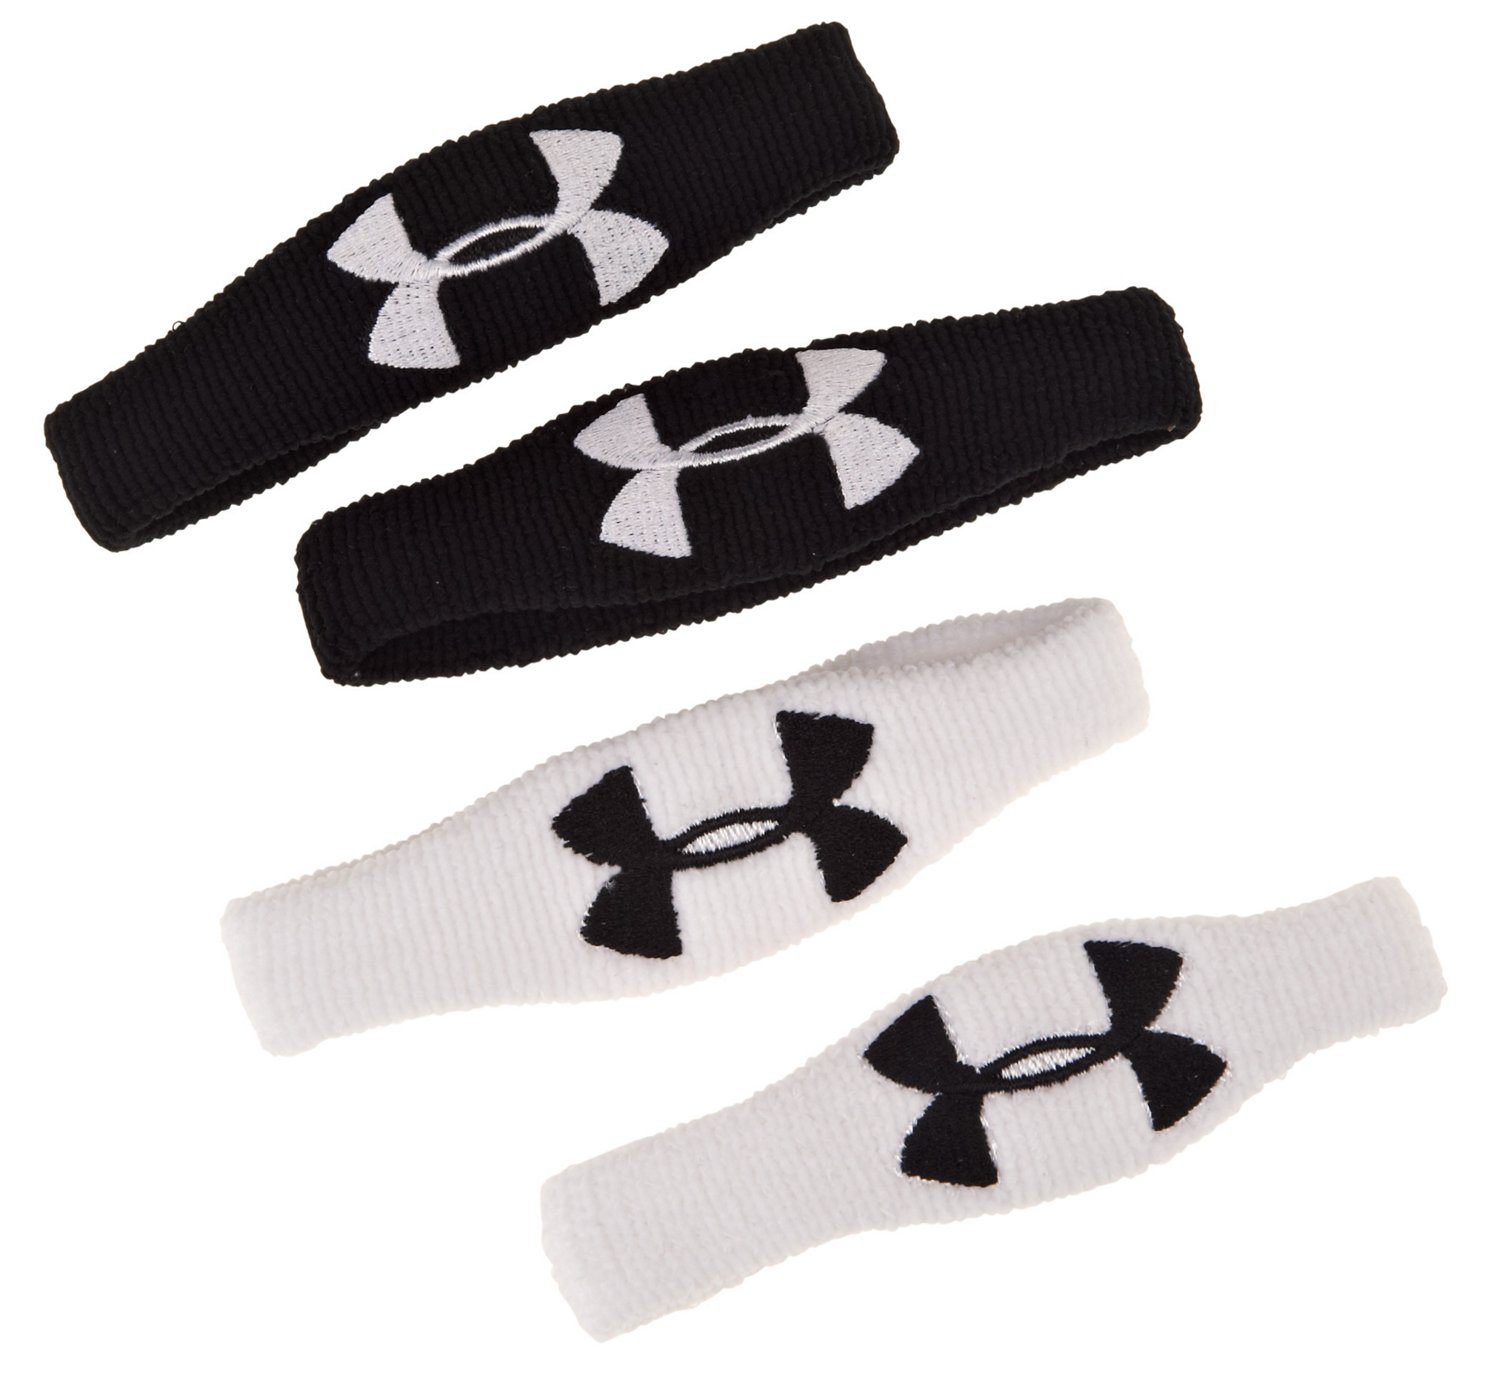 under armour wristbands rubber